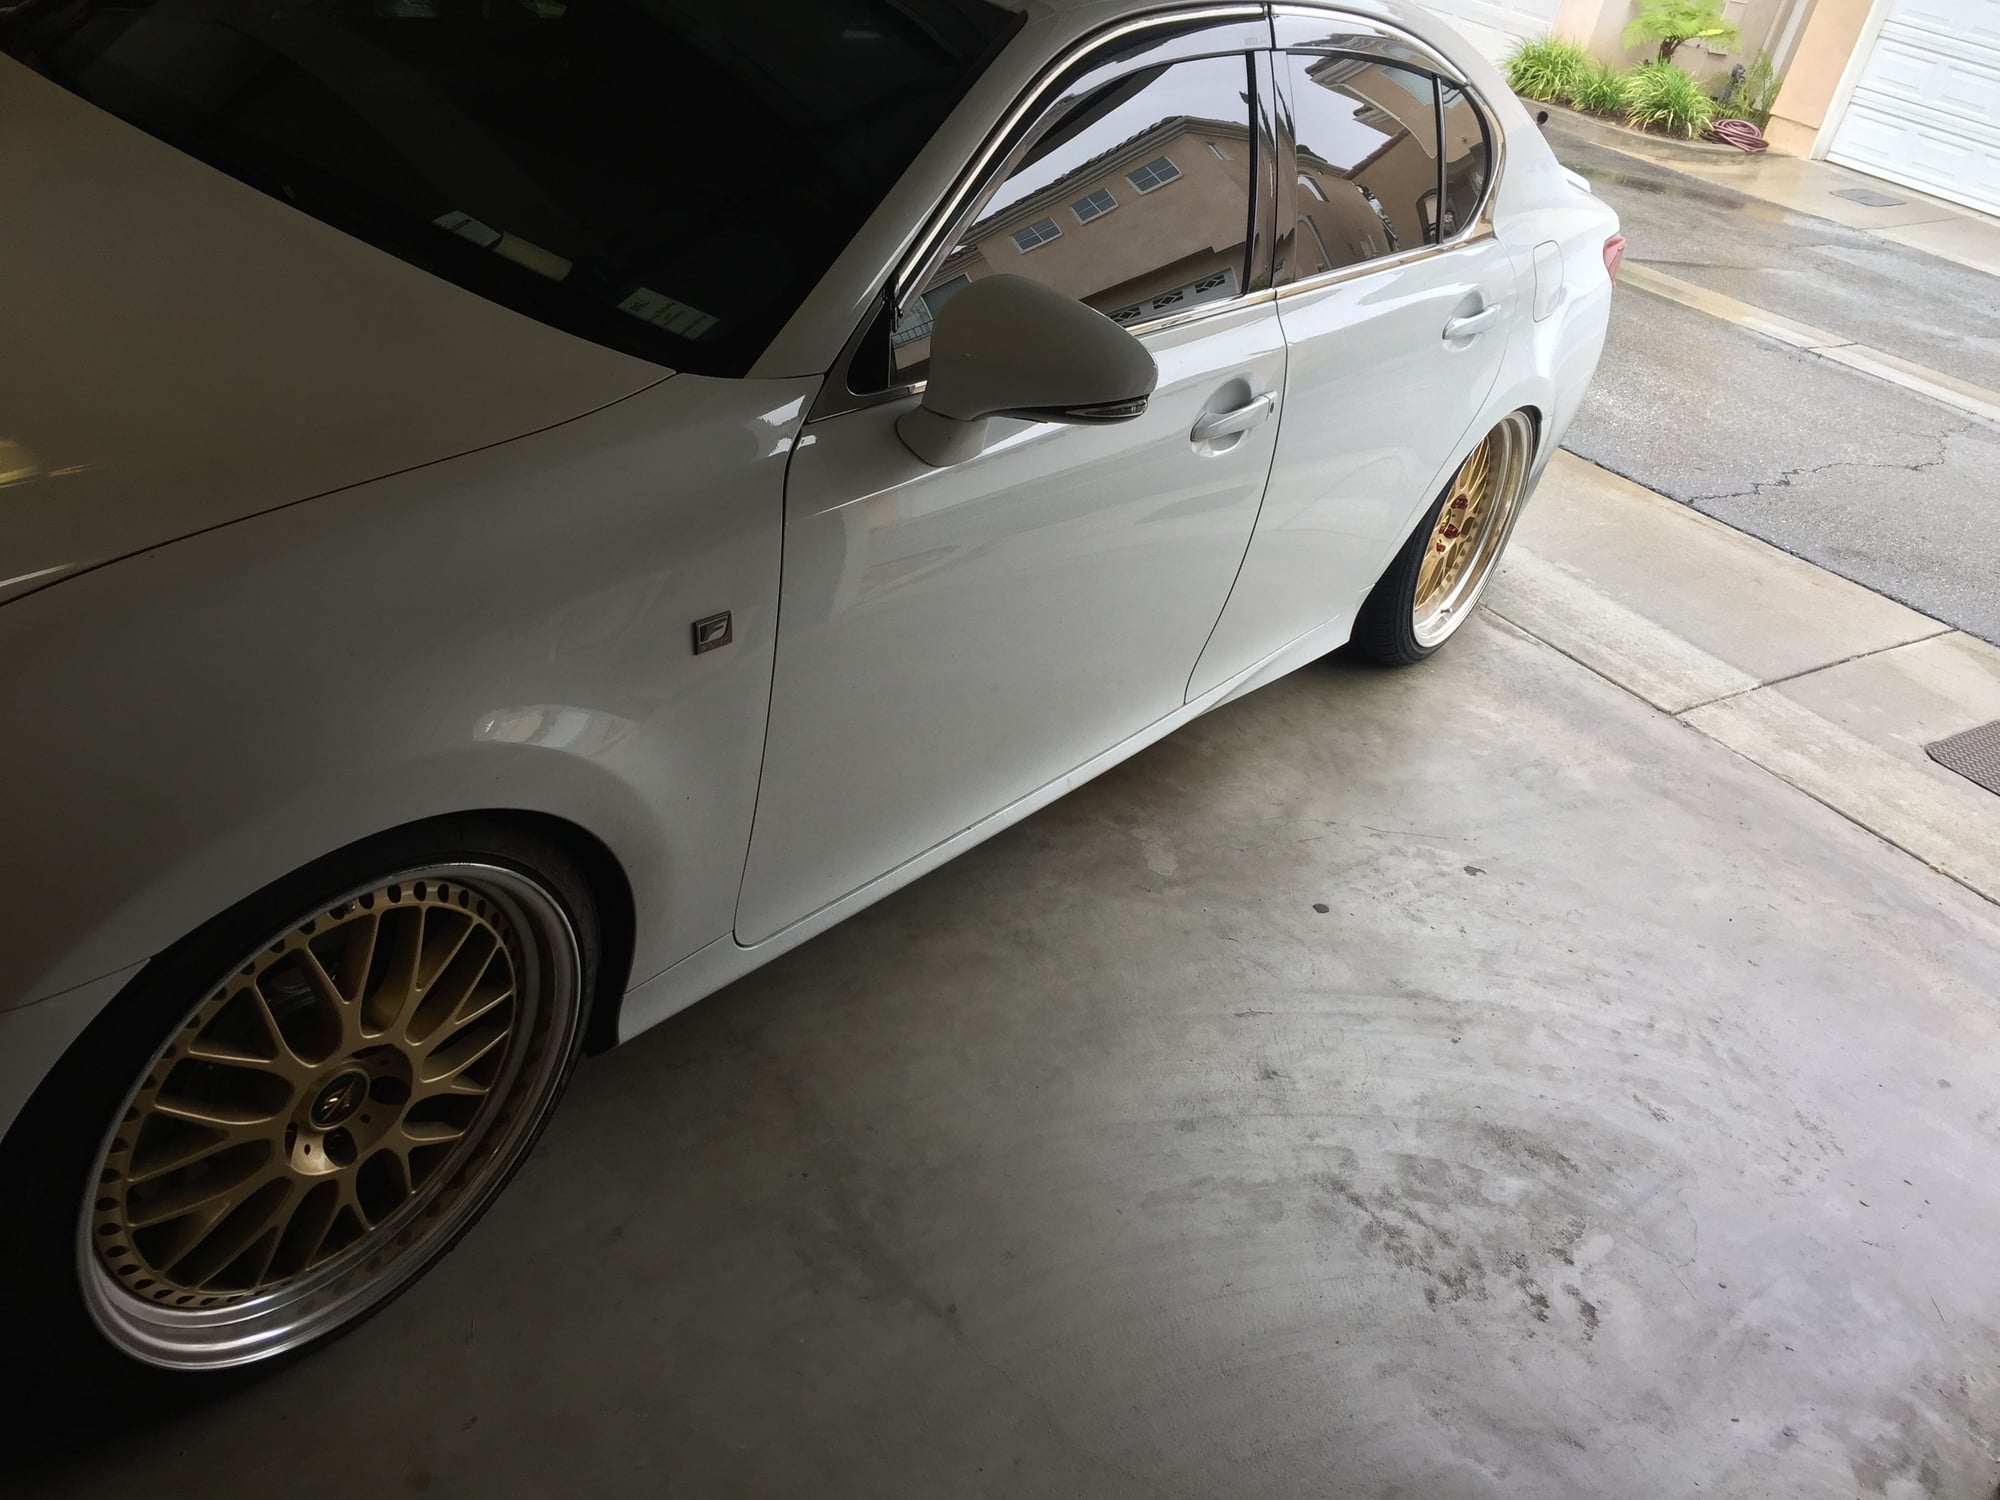 Wheels and Tires/Axles - SOCAL FS: Work VSXX (Gold) 20" Wheels - Used - 2014 to 2019 Lexus GS350 - Pasadena, CA 91010, United States